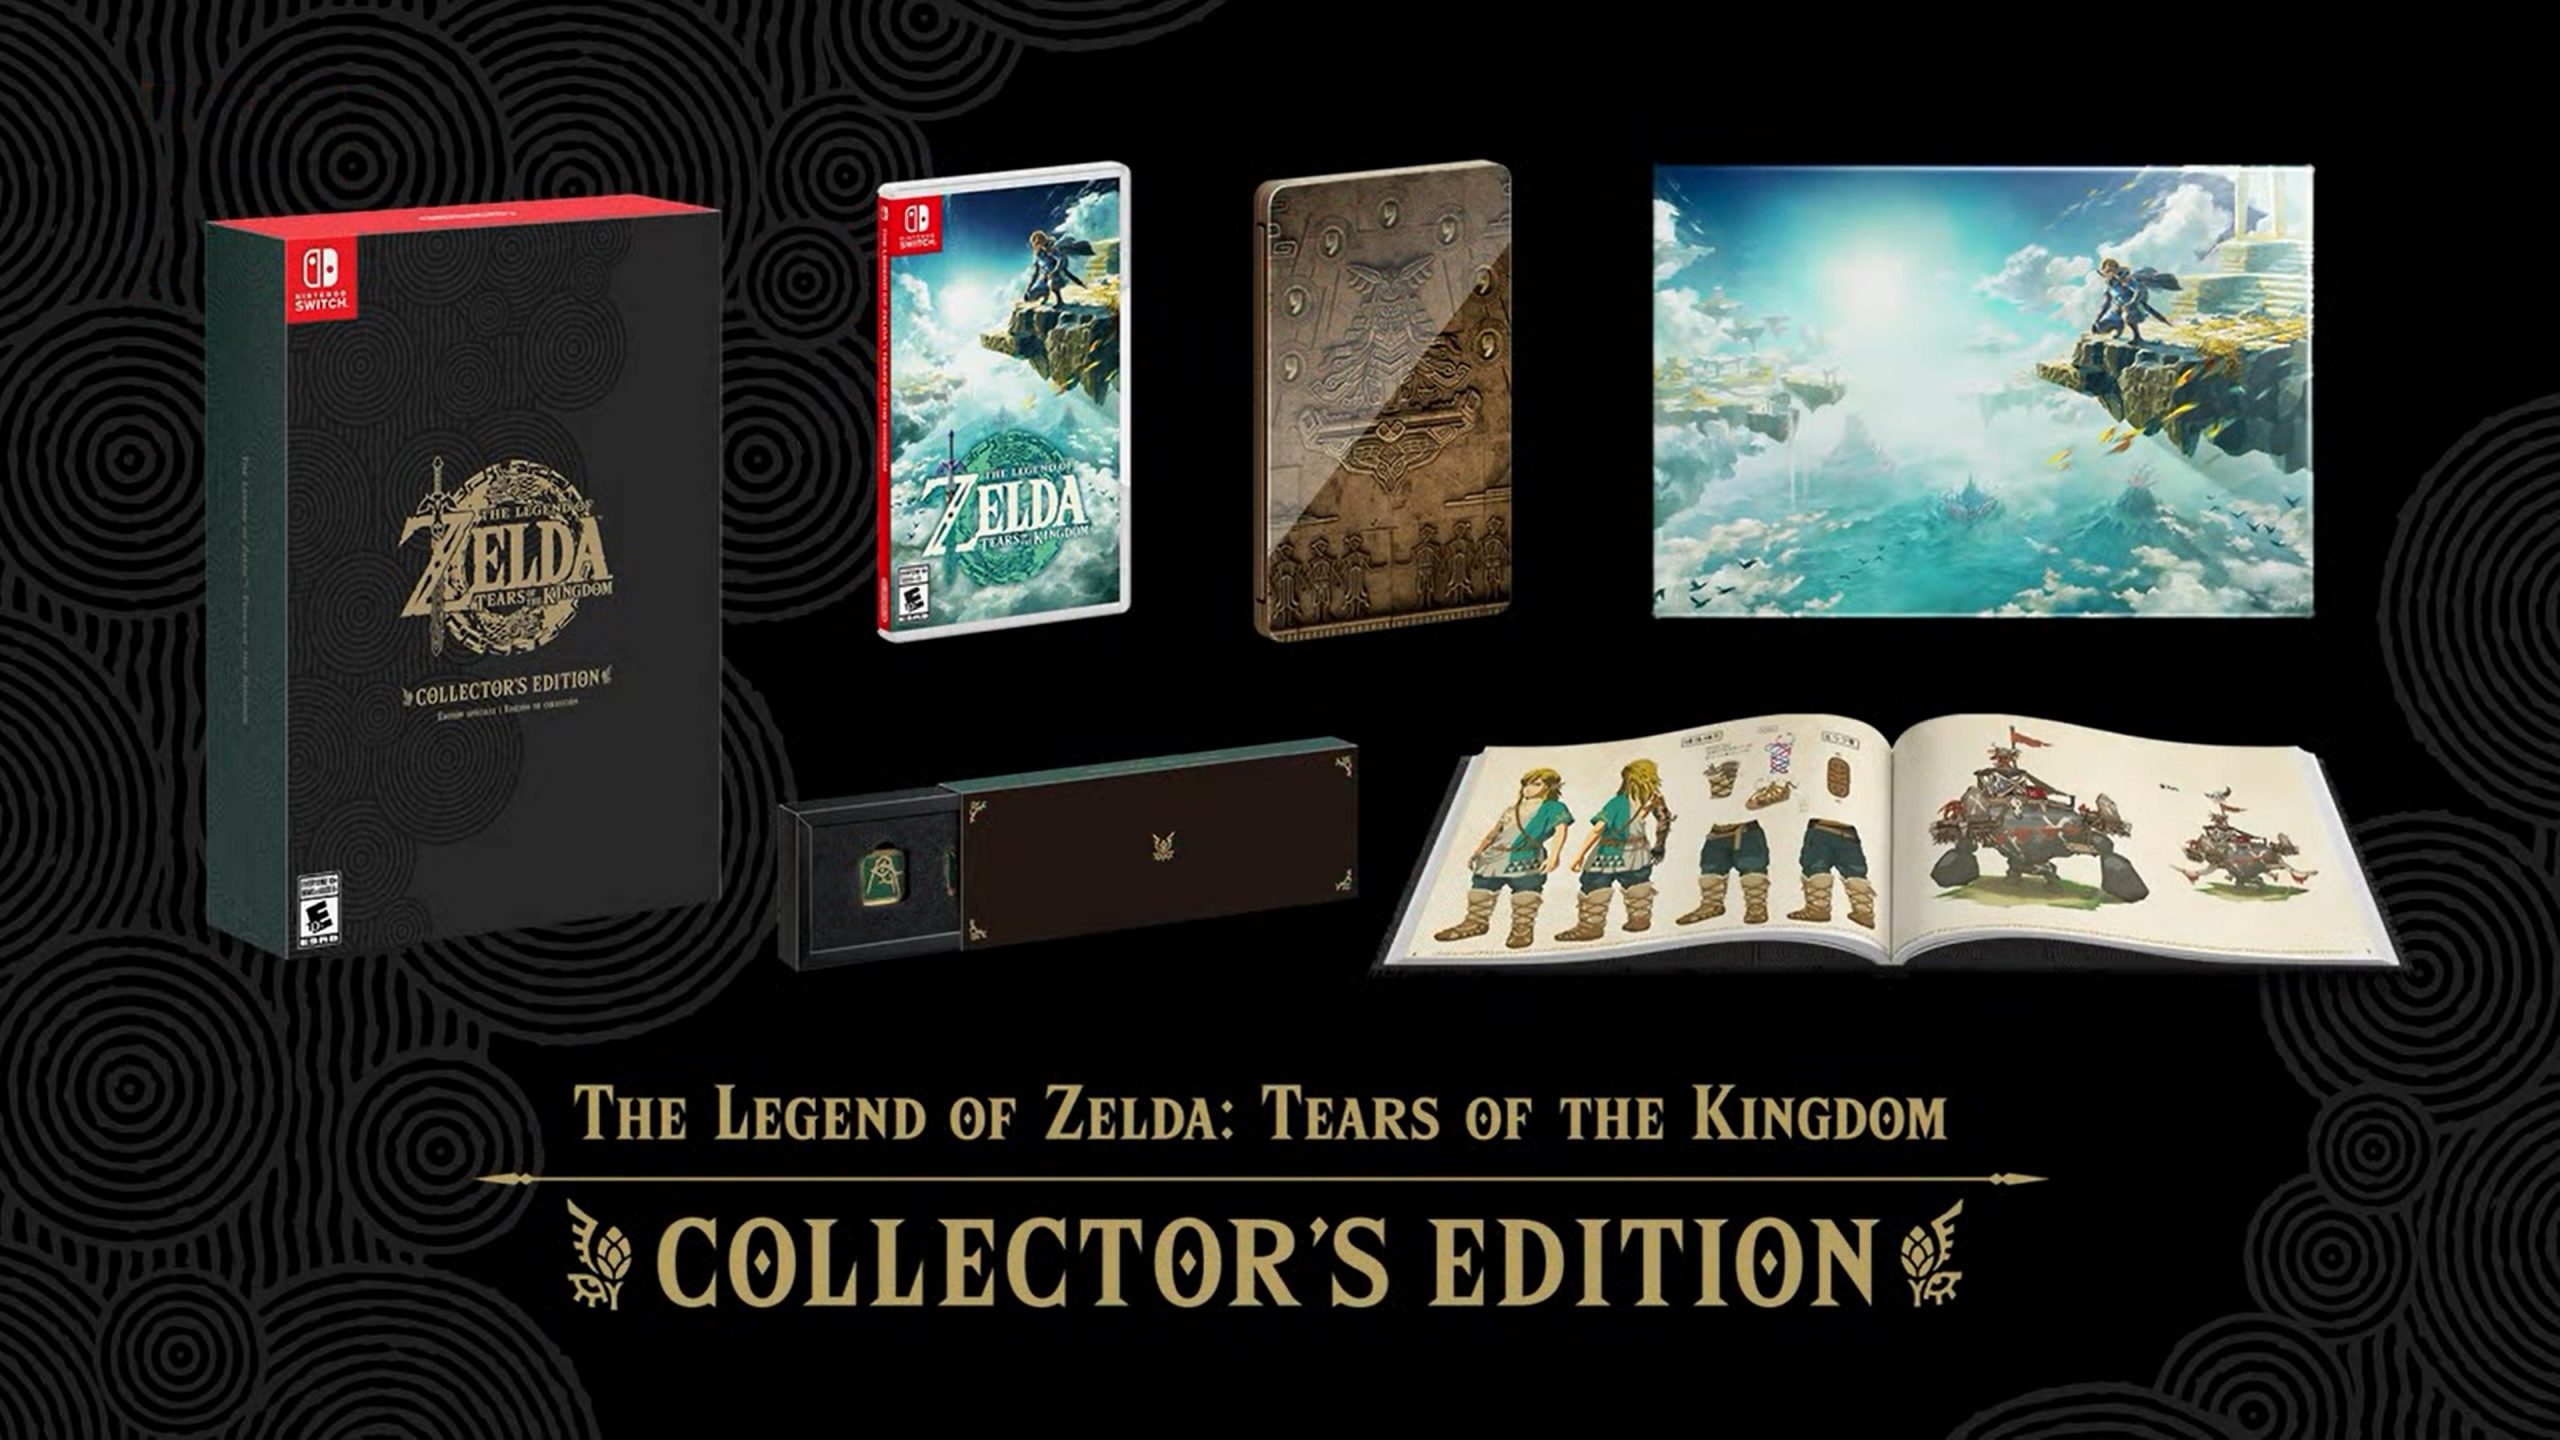 Zelda-Tears-of-the-Kingdom-Collectors-Edition--scaled.jpg